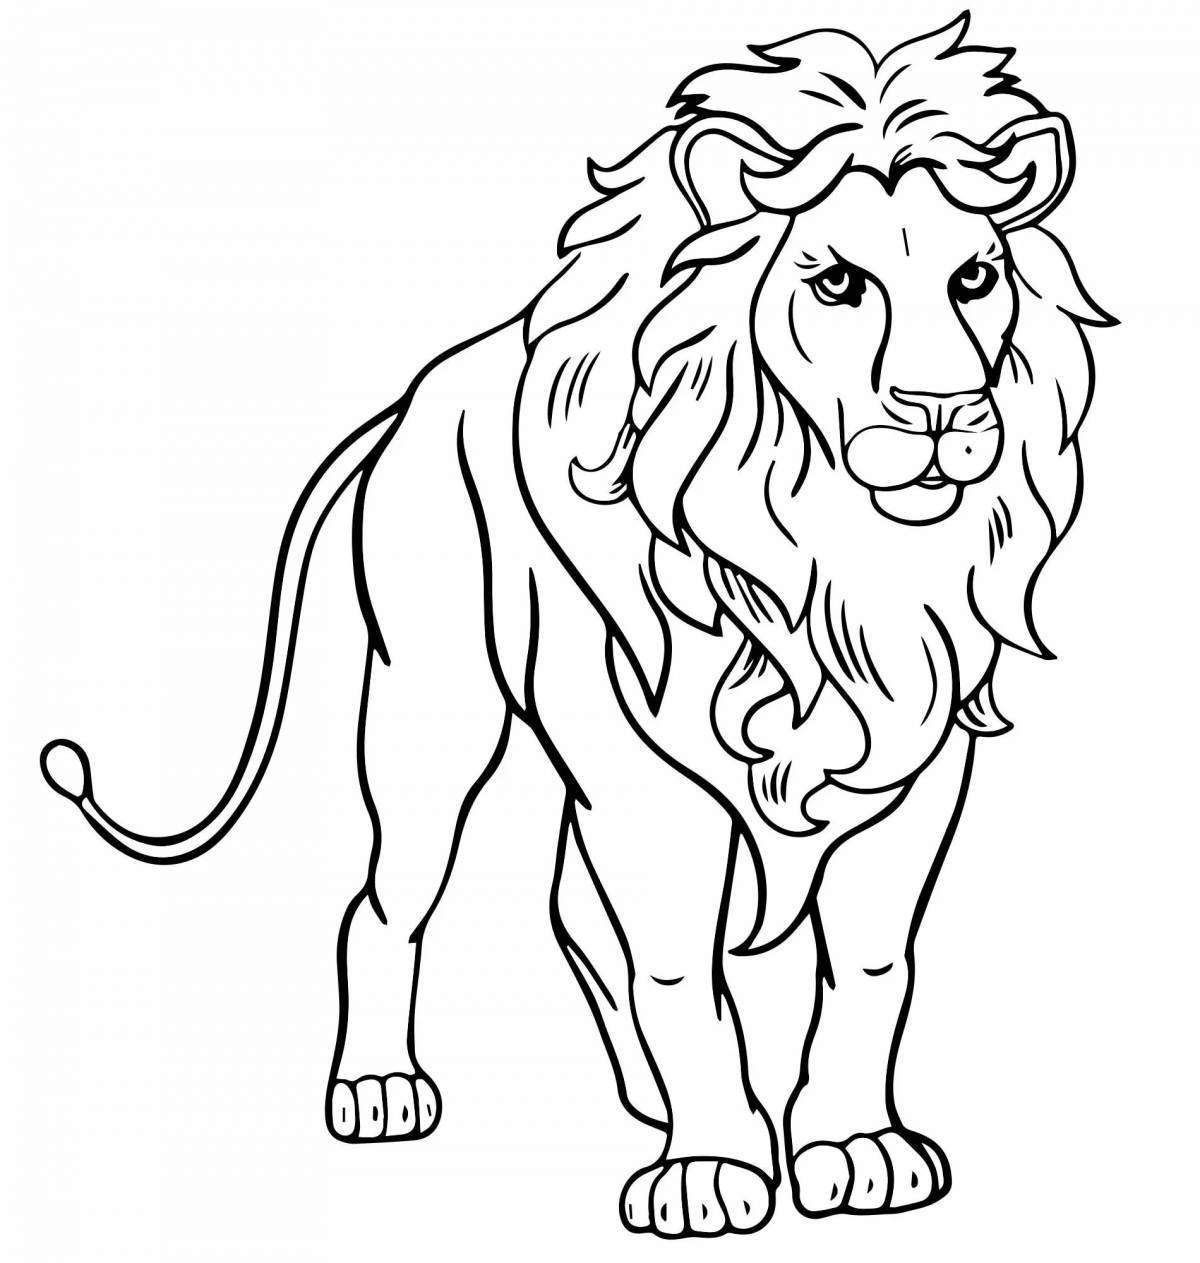 Colorful lion drawing for kids